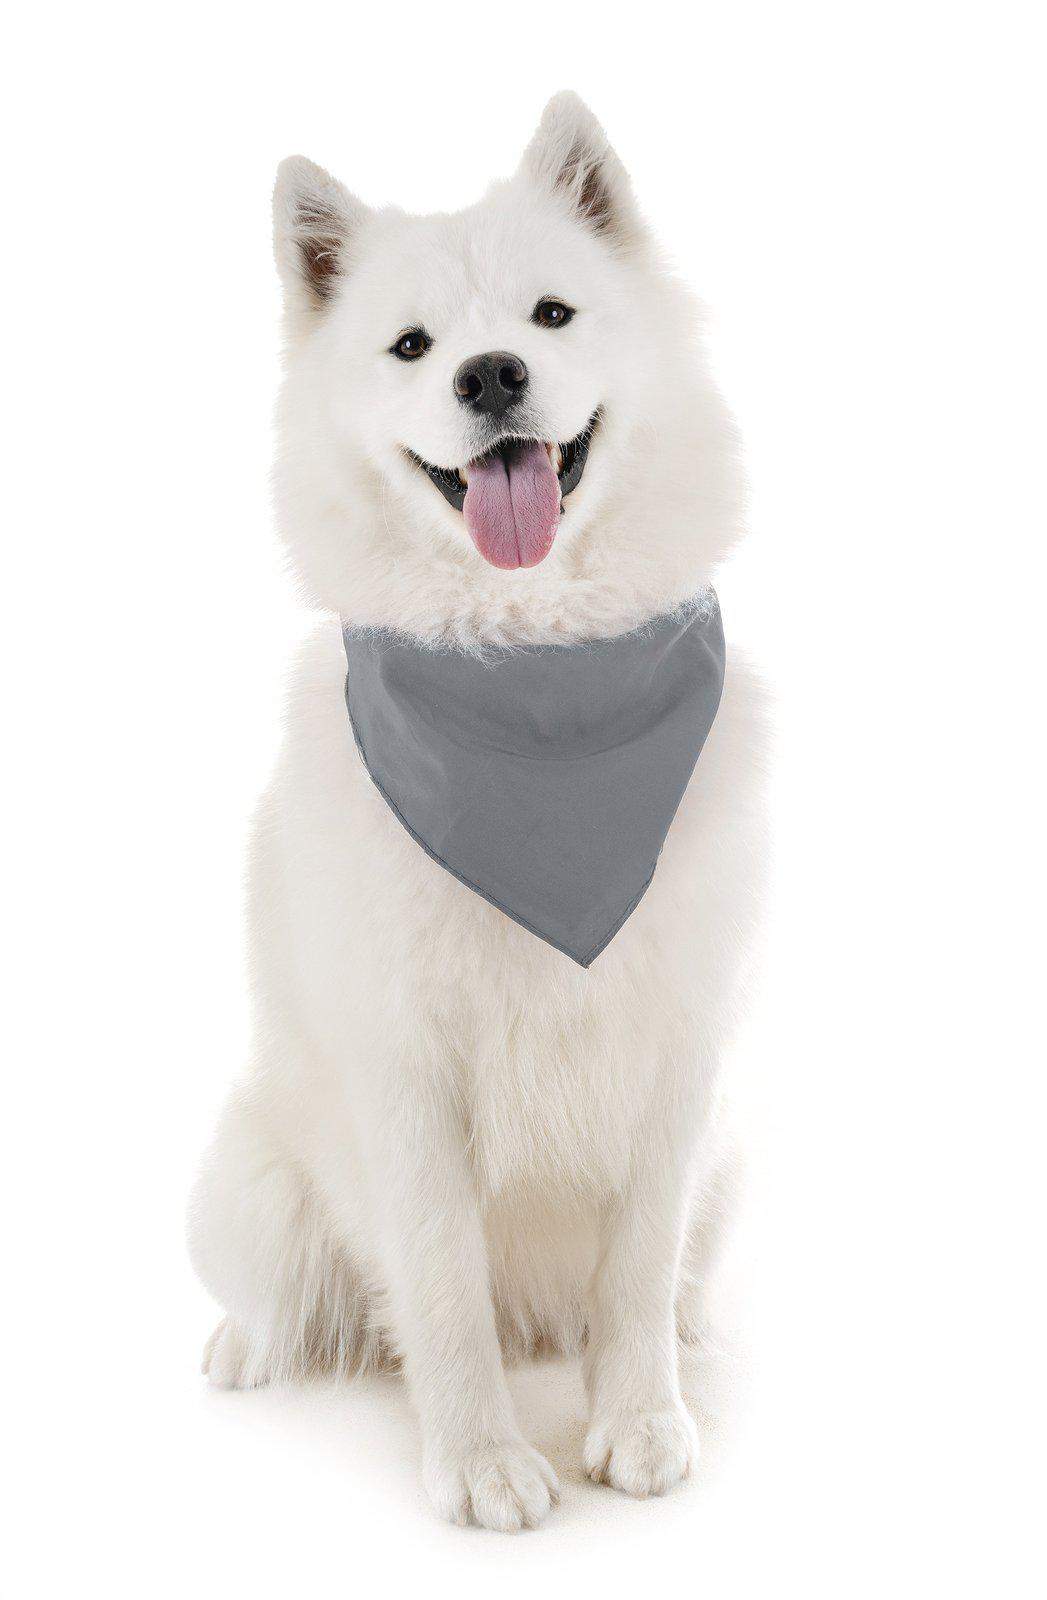 Balec Dog Solid Cotton Bandanas - 5 Pieces - Scarf Triangle Bibs for Any Small, Medium or Large Pets